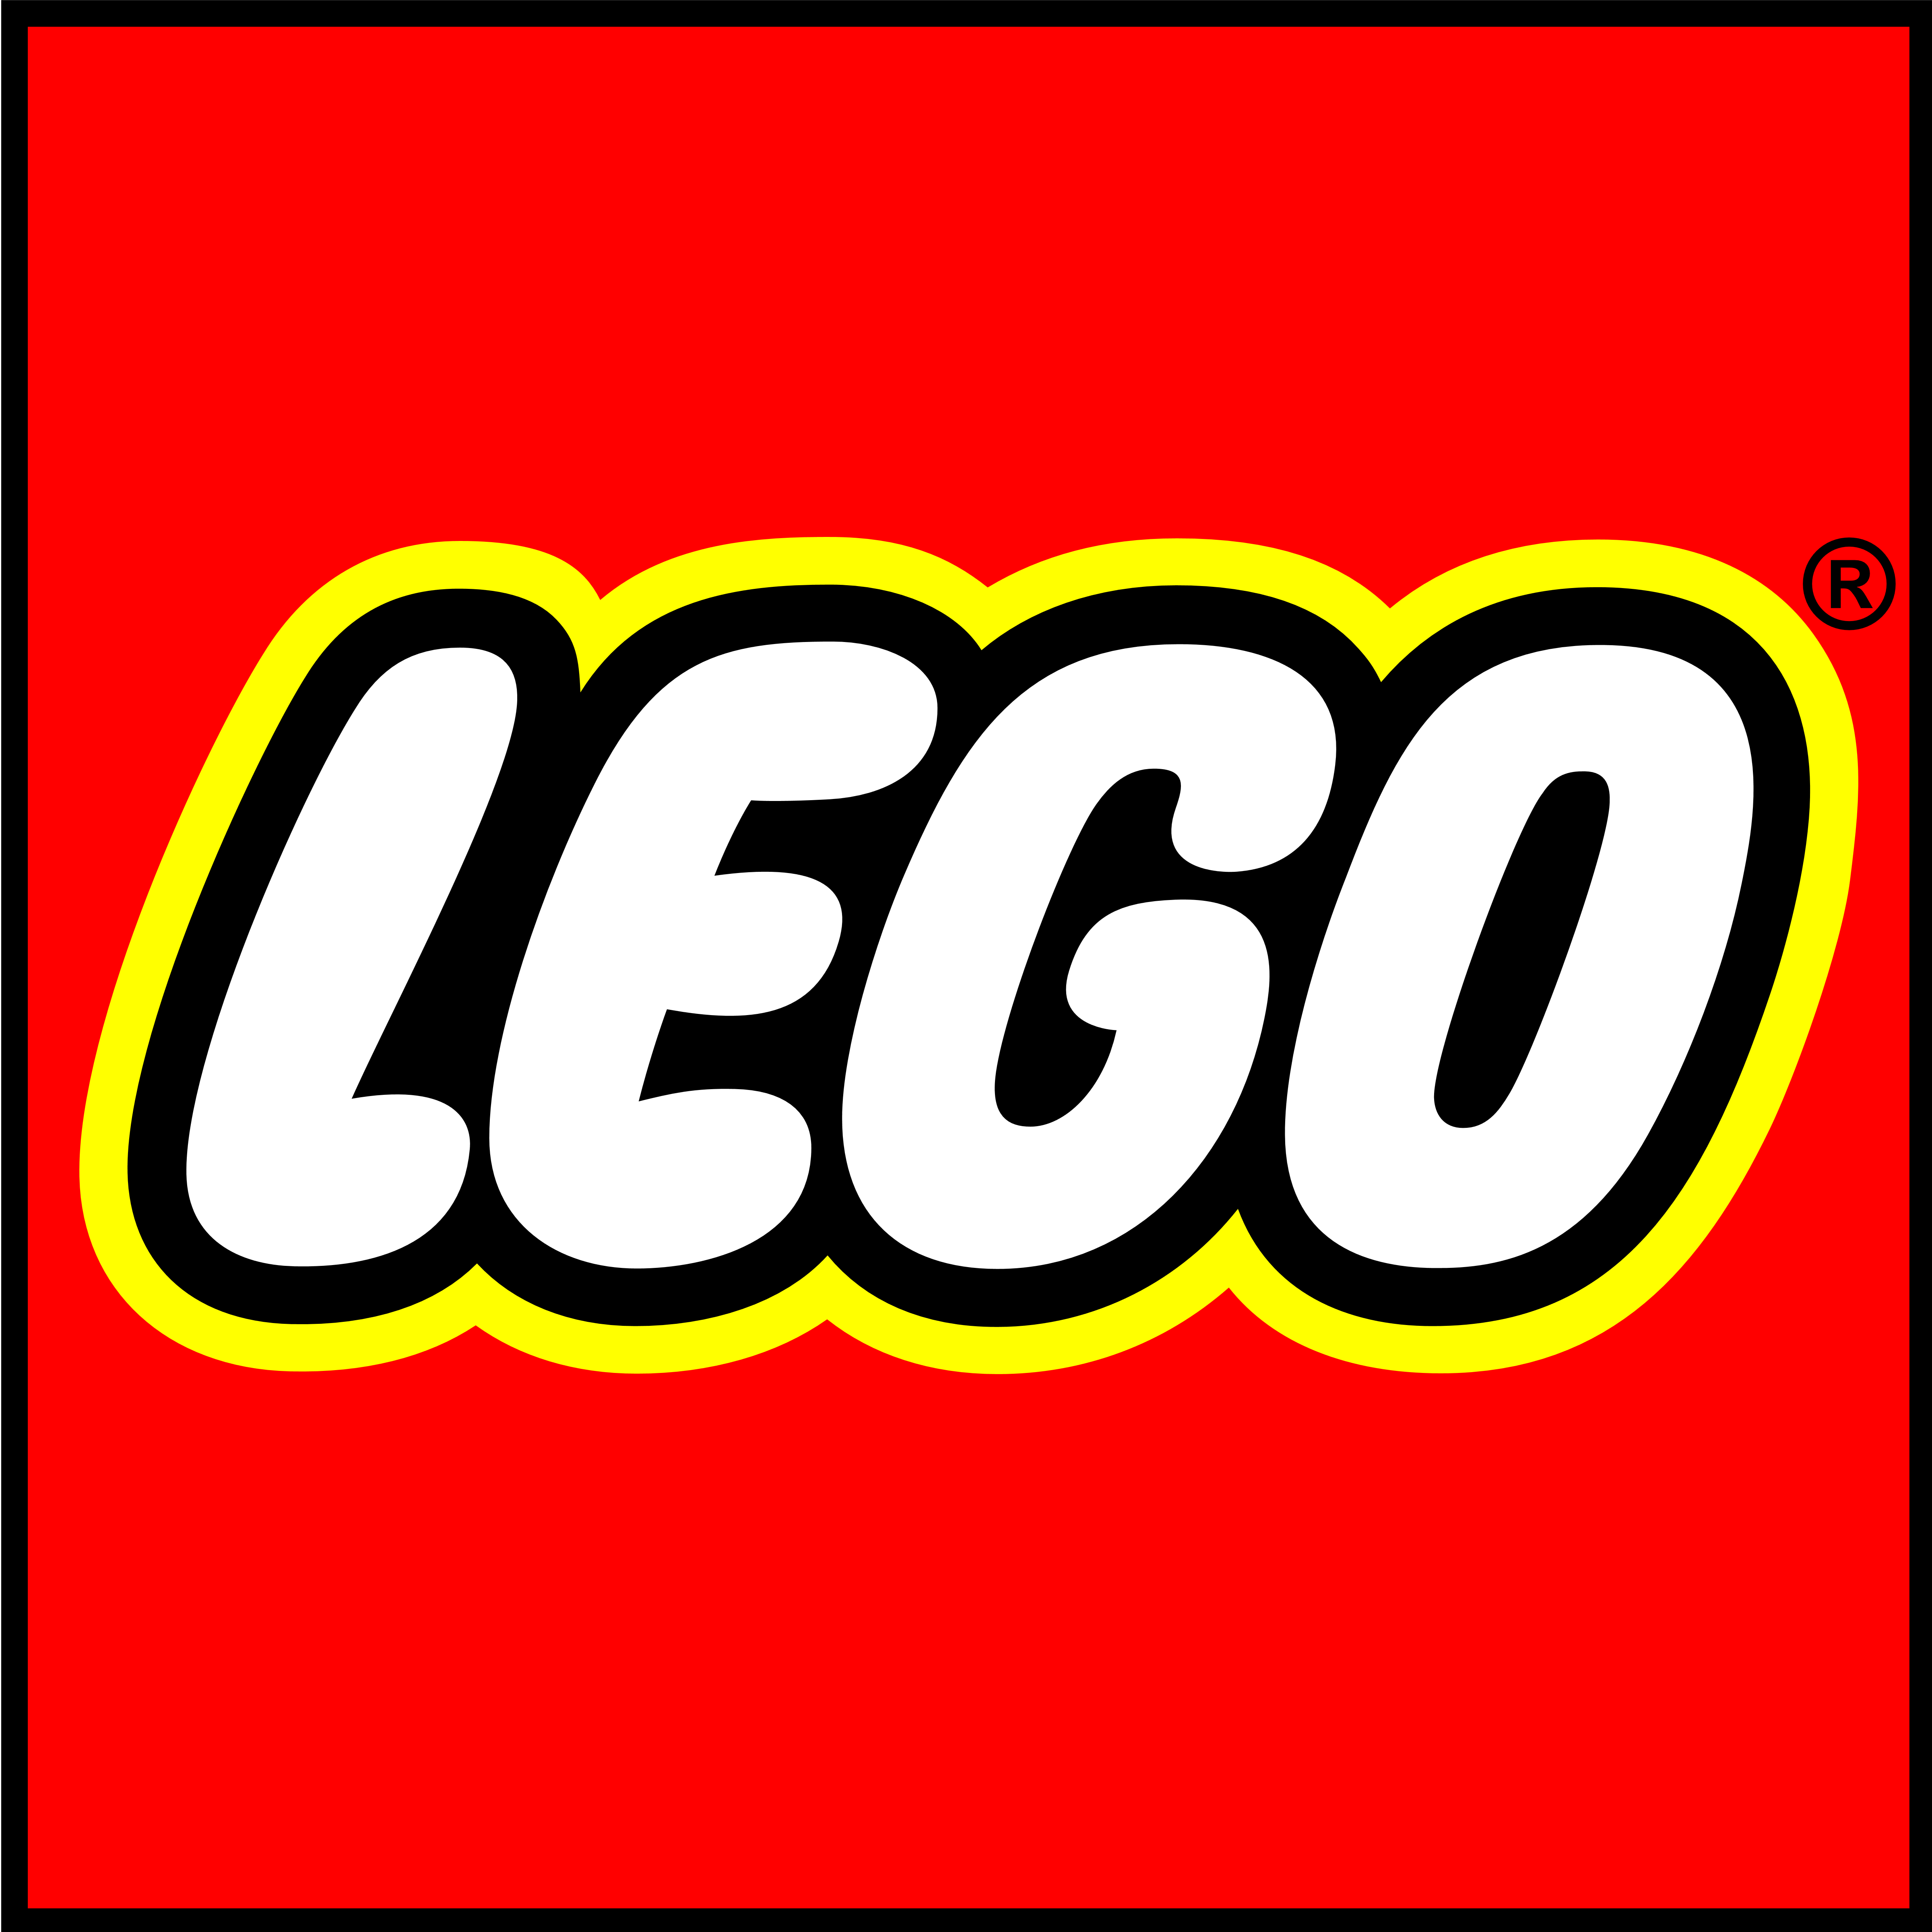 Lego logo, logotype. All logos, emblems, brands pictures gallery.